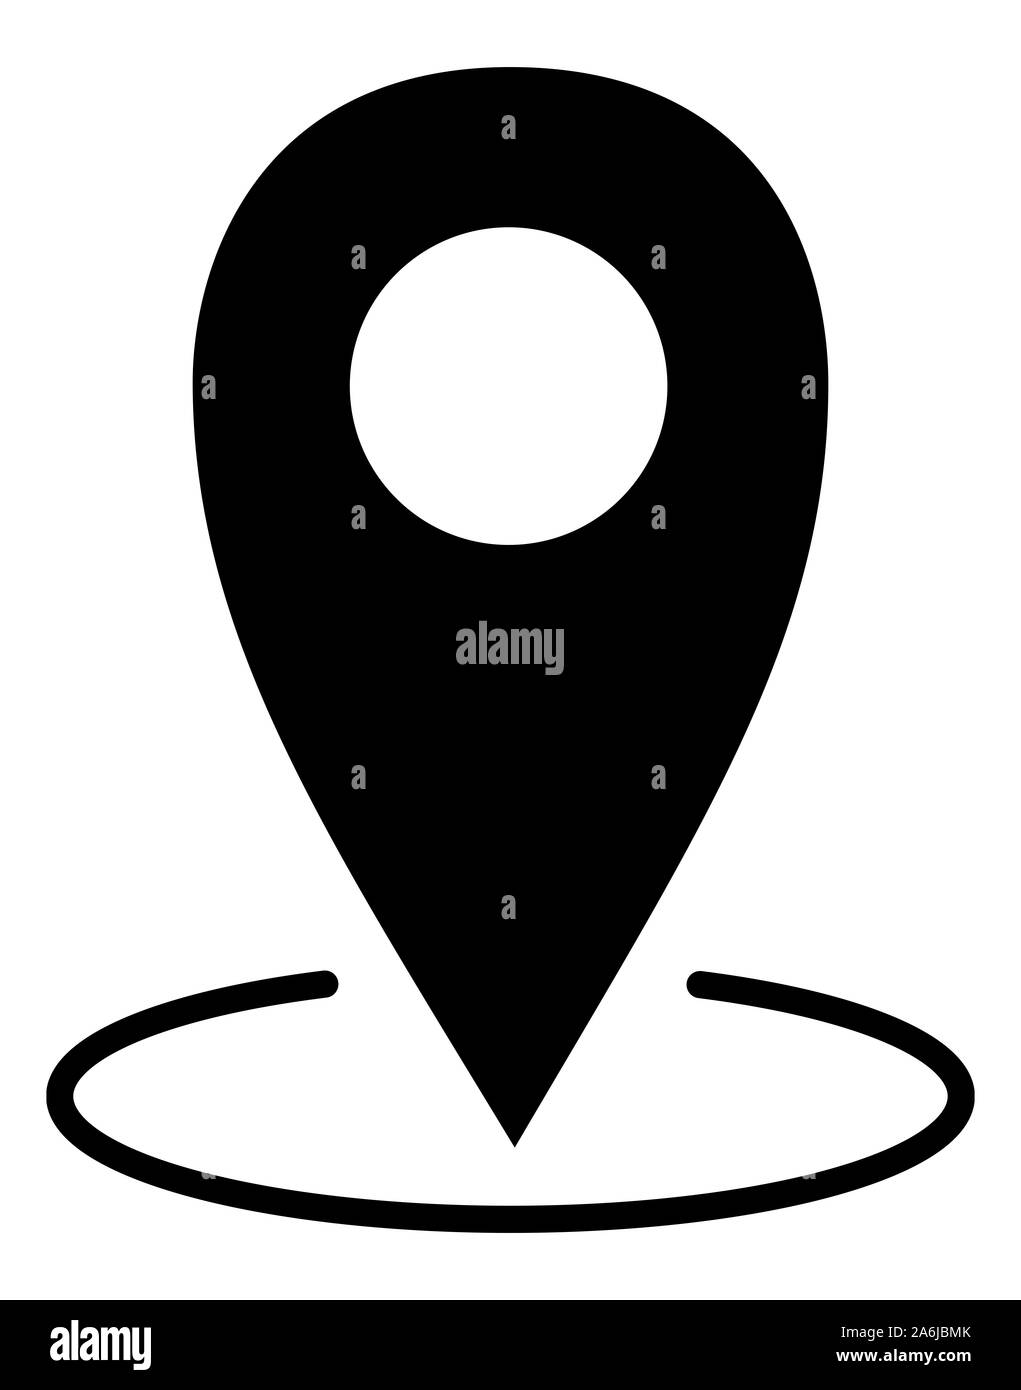 Black map pointer with a white background Stock Photo